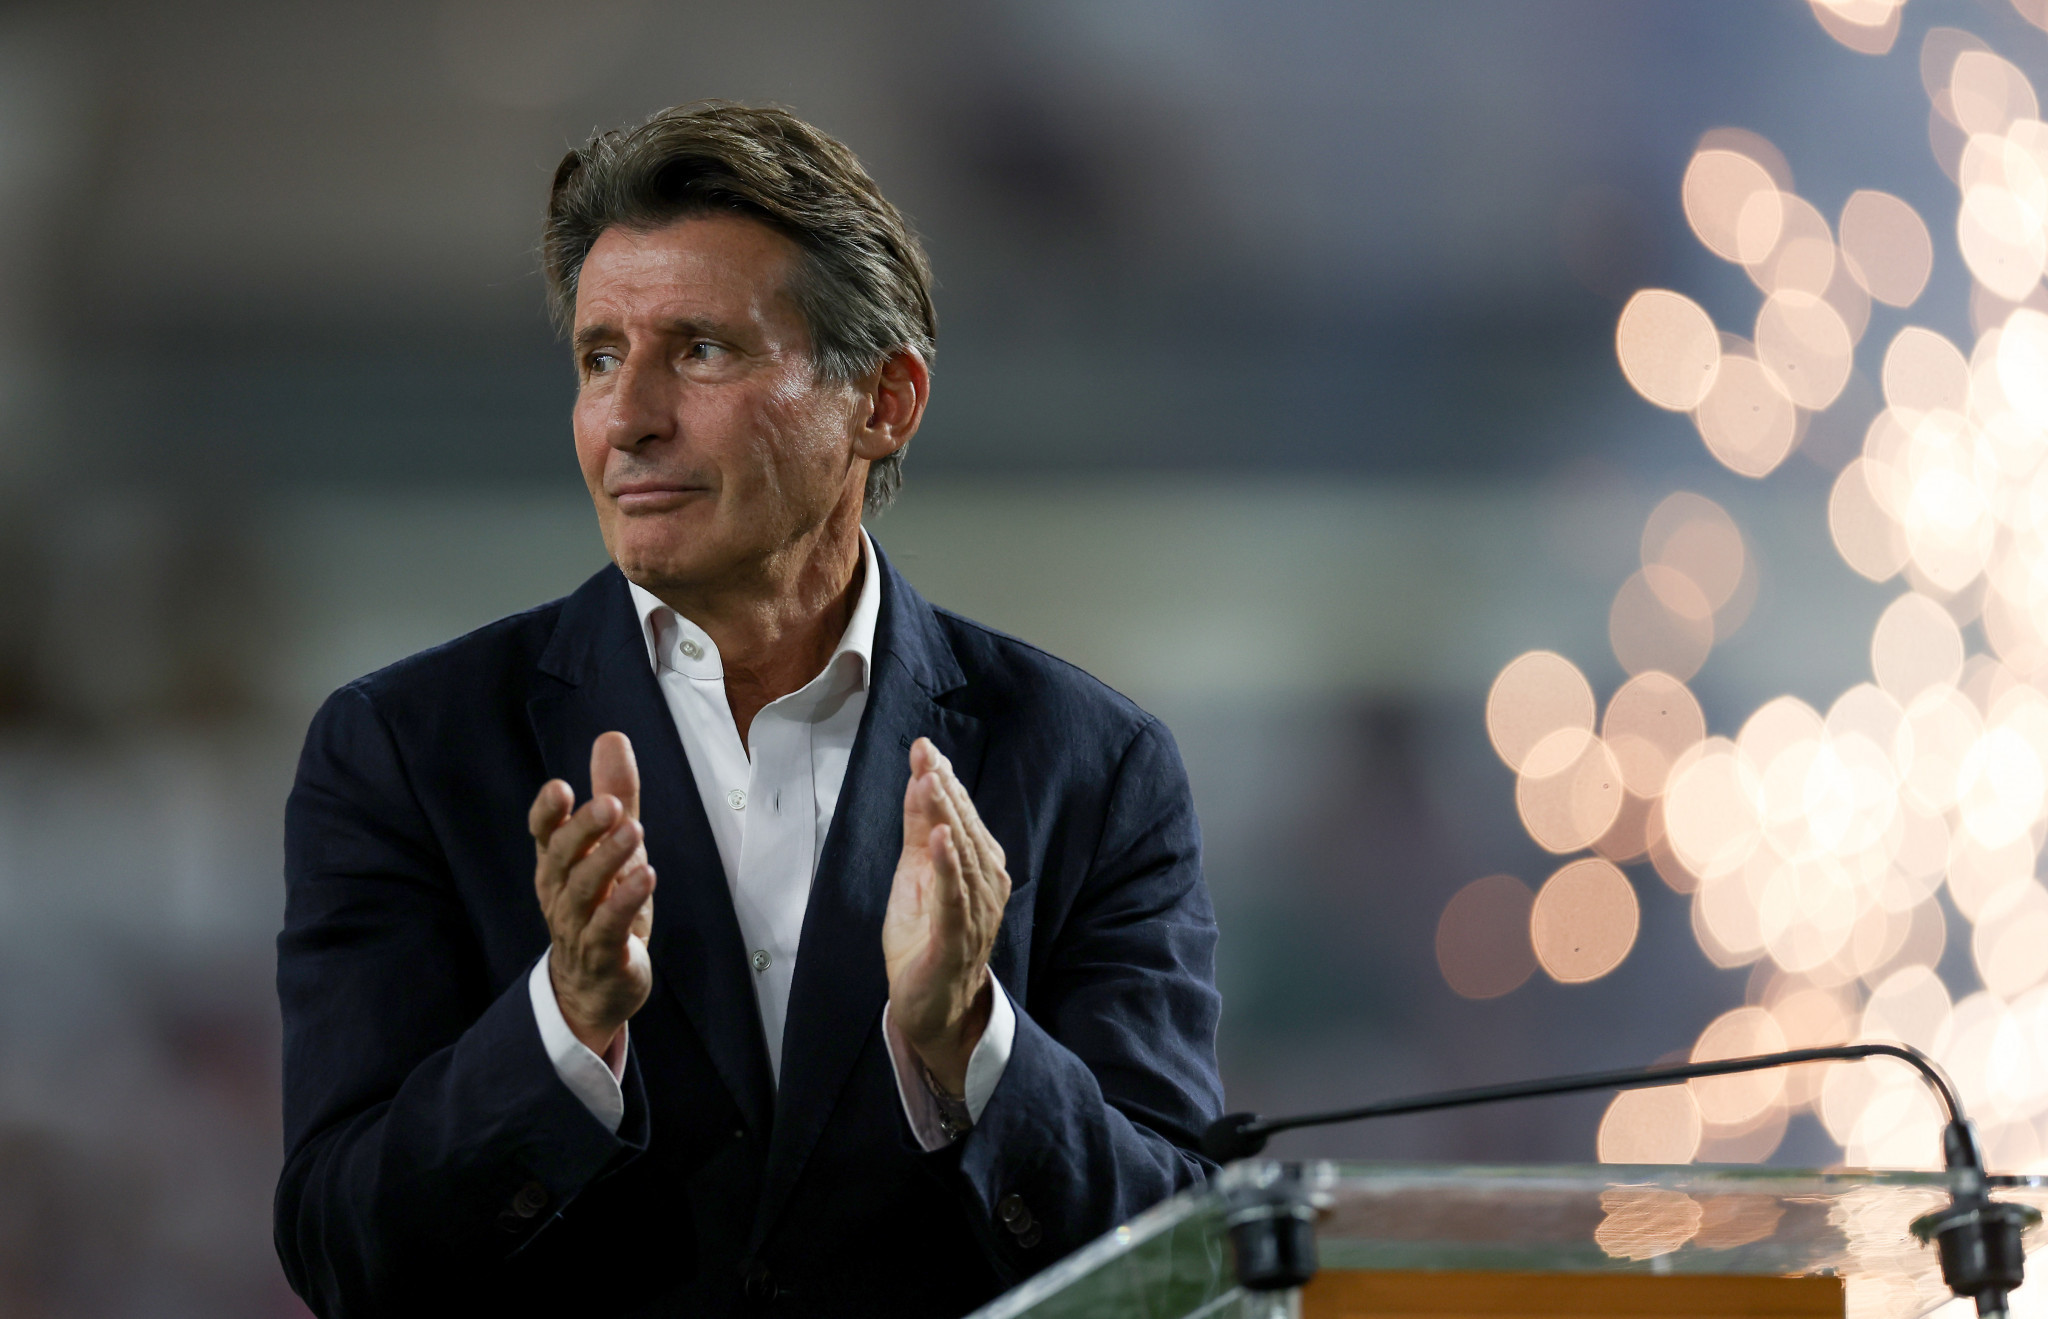 Coe praises Orbán after World Championships and encourages Budapest Olympic bid